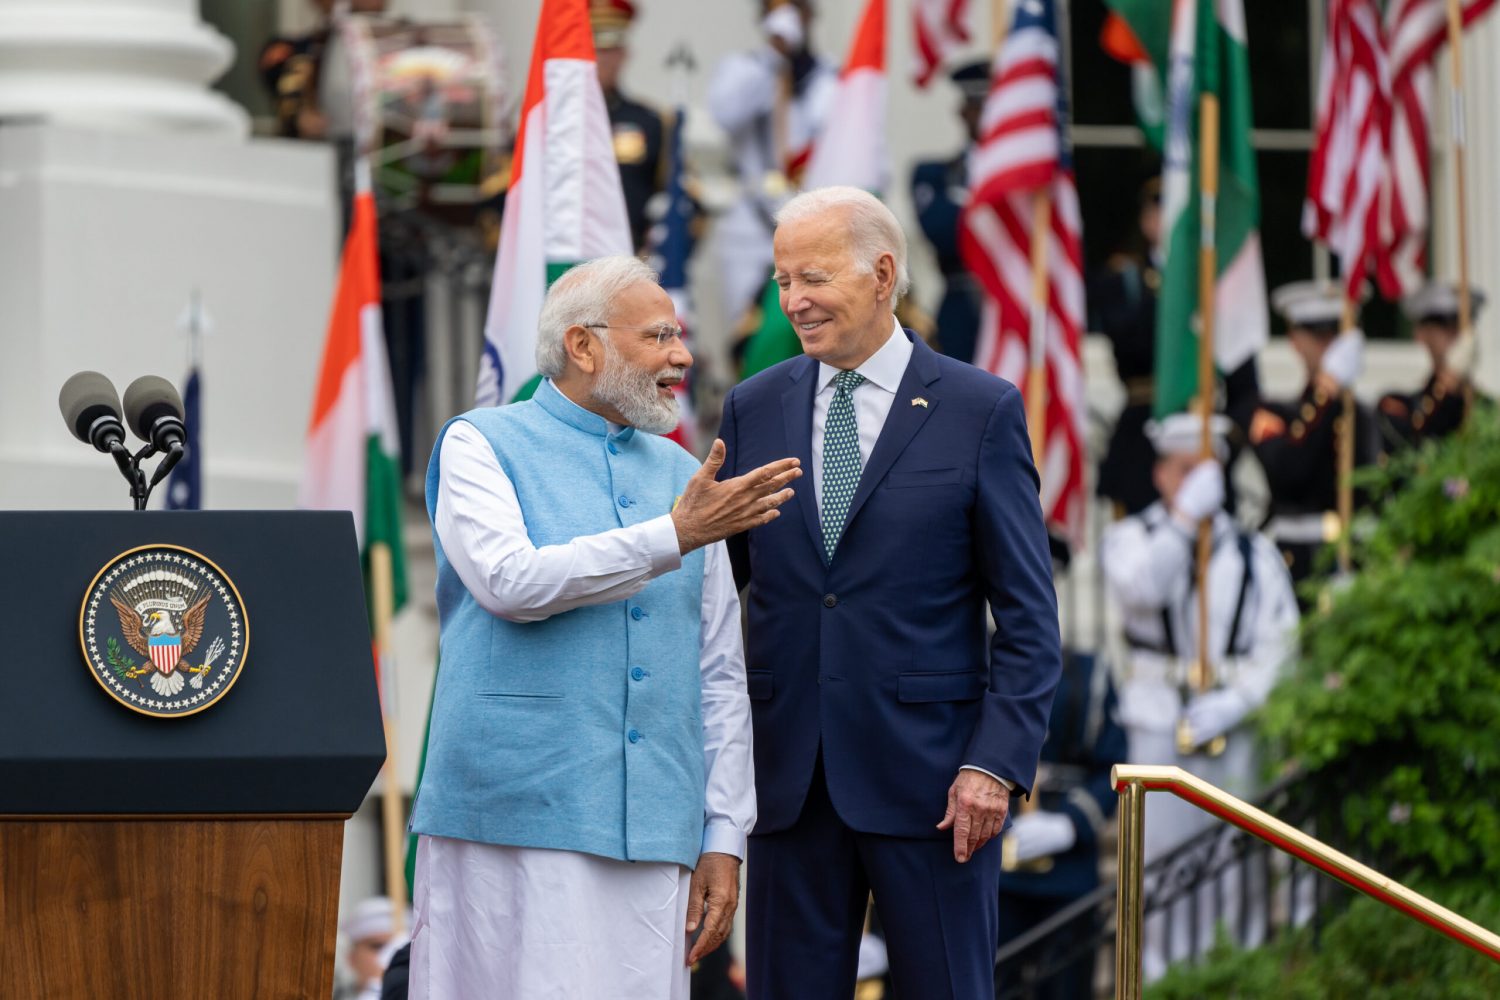 Indian Prime Minister Narendra Modi and President Joe Biden at the White House South Lawn on June 22, 2023.